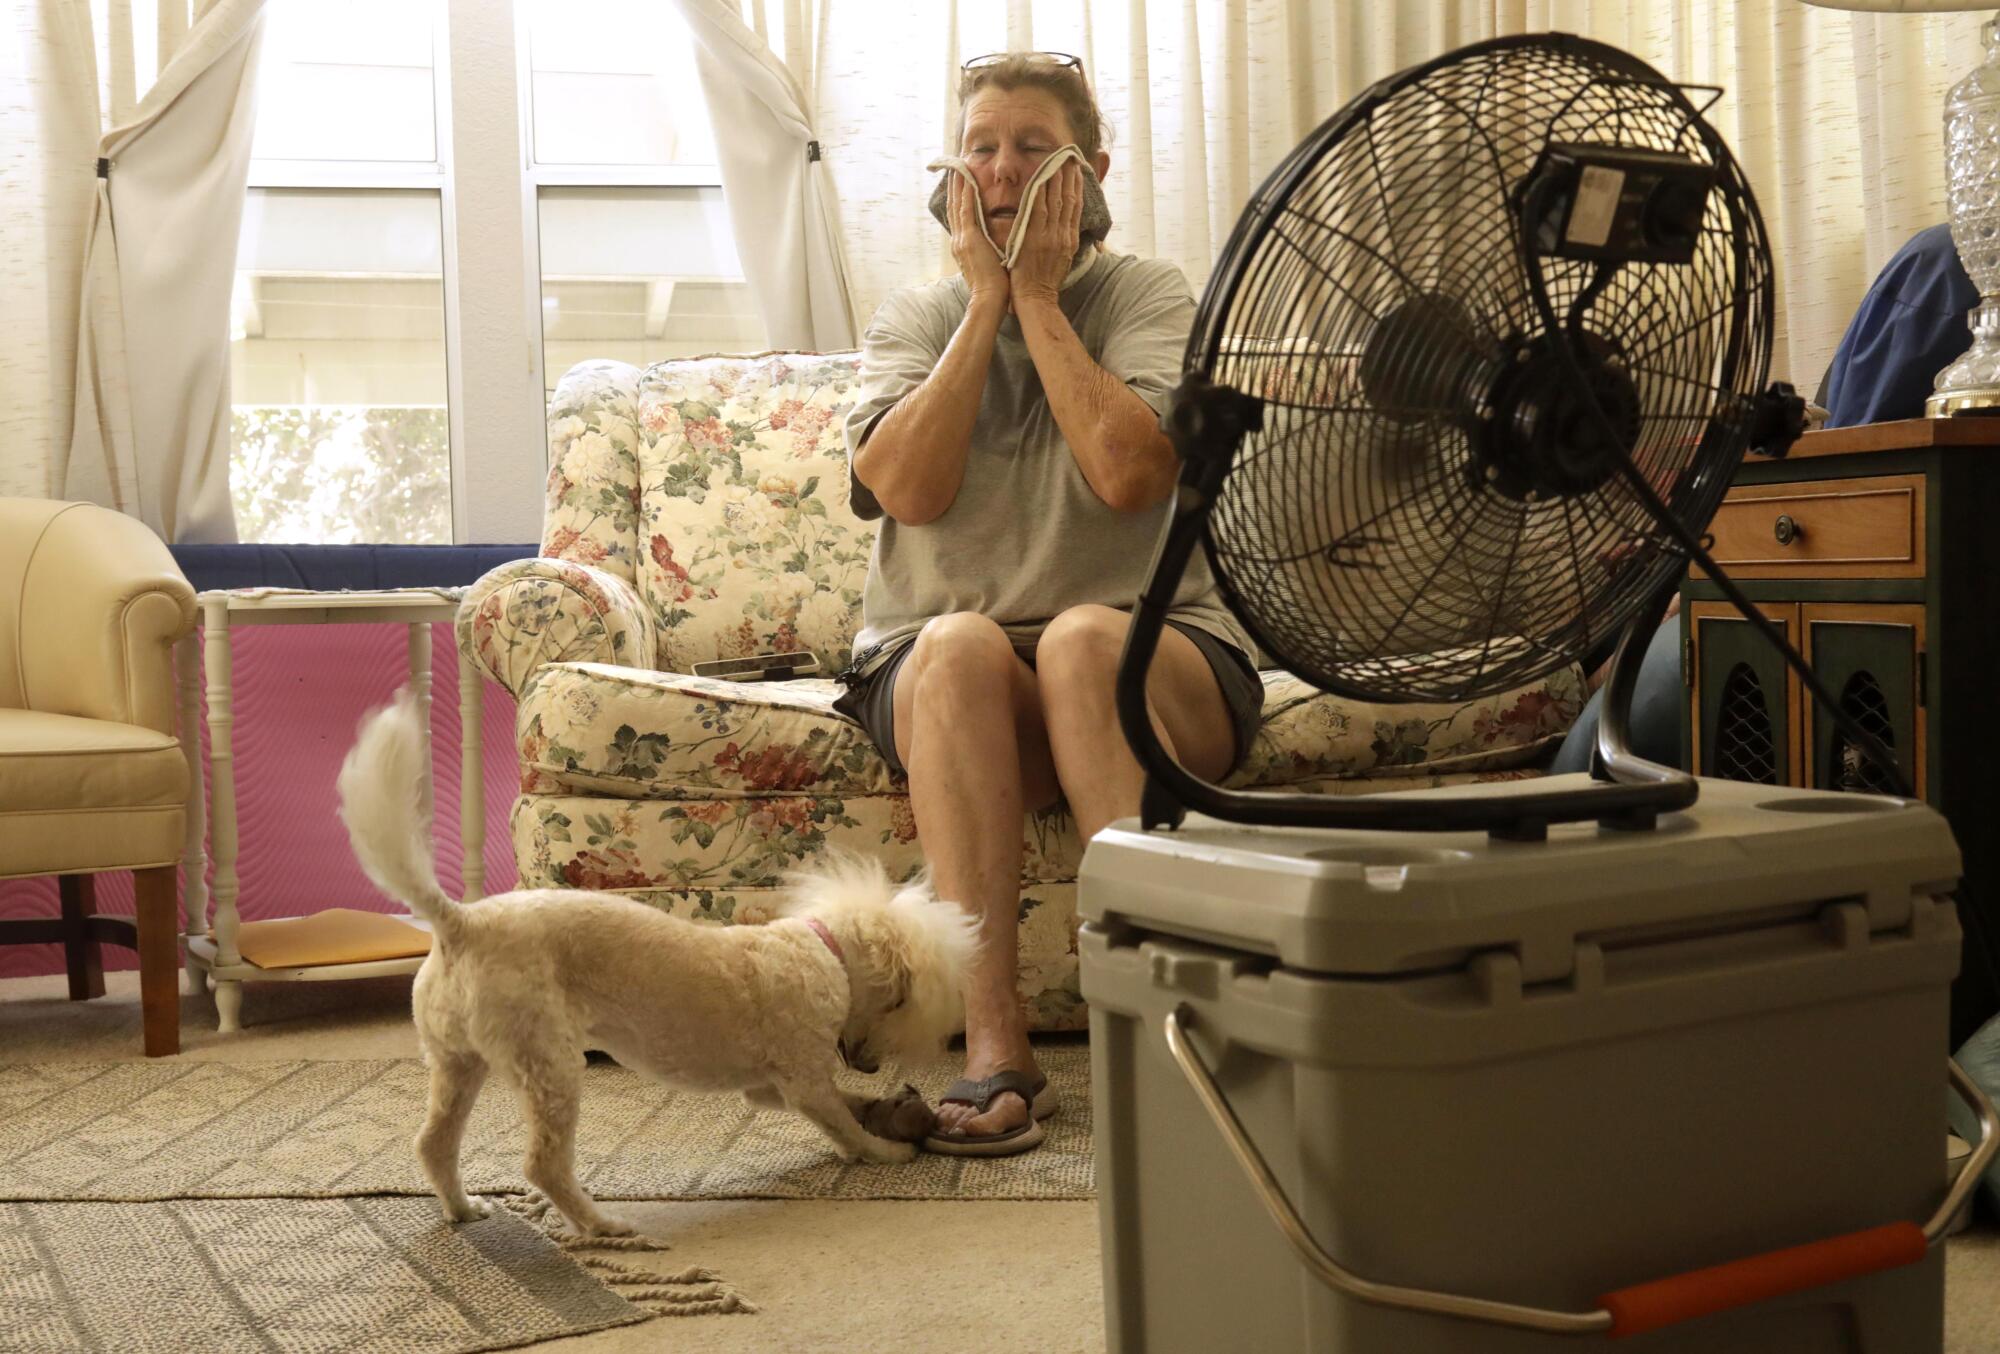 Diane McClinden, 63, and her dog sit in front of a fan.